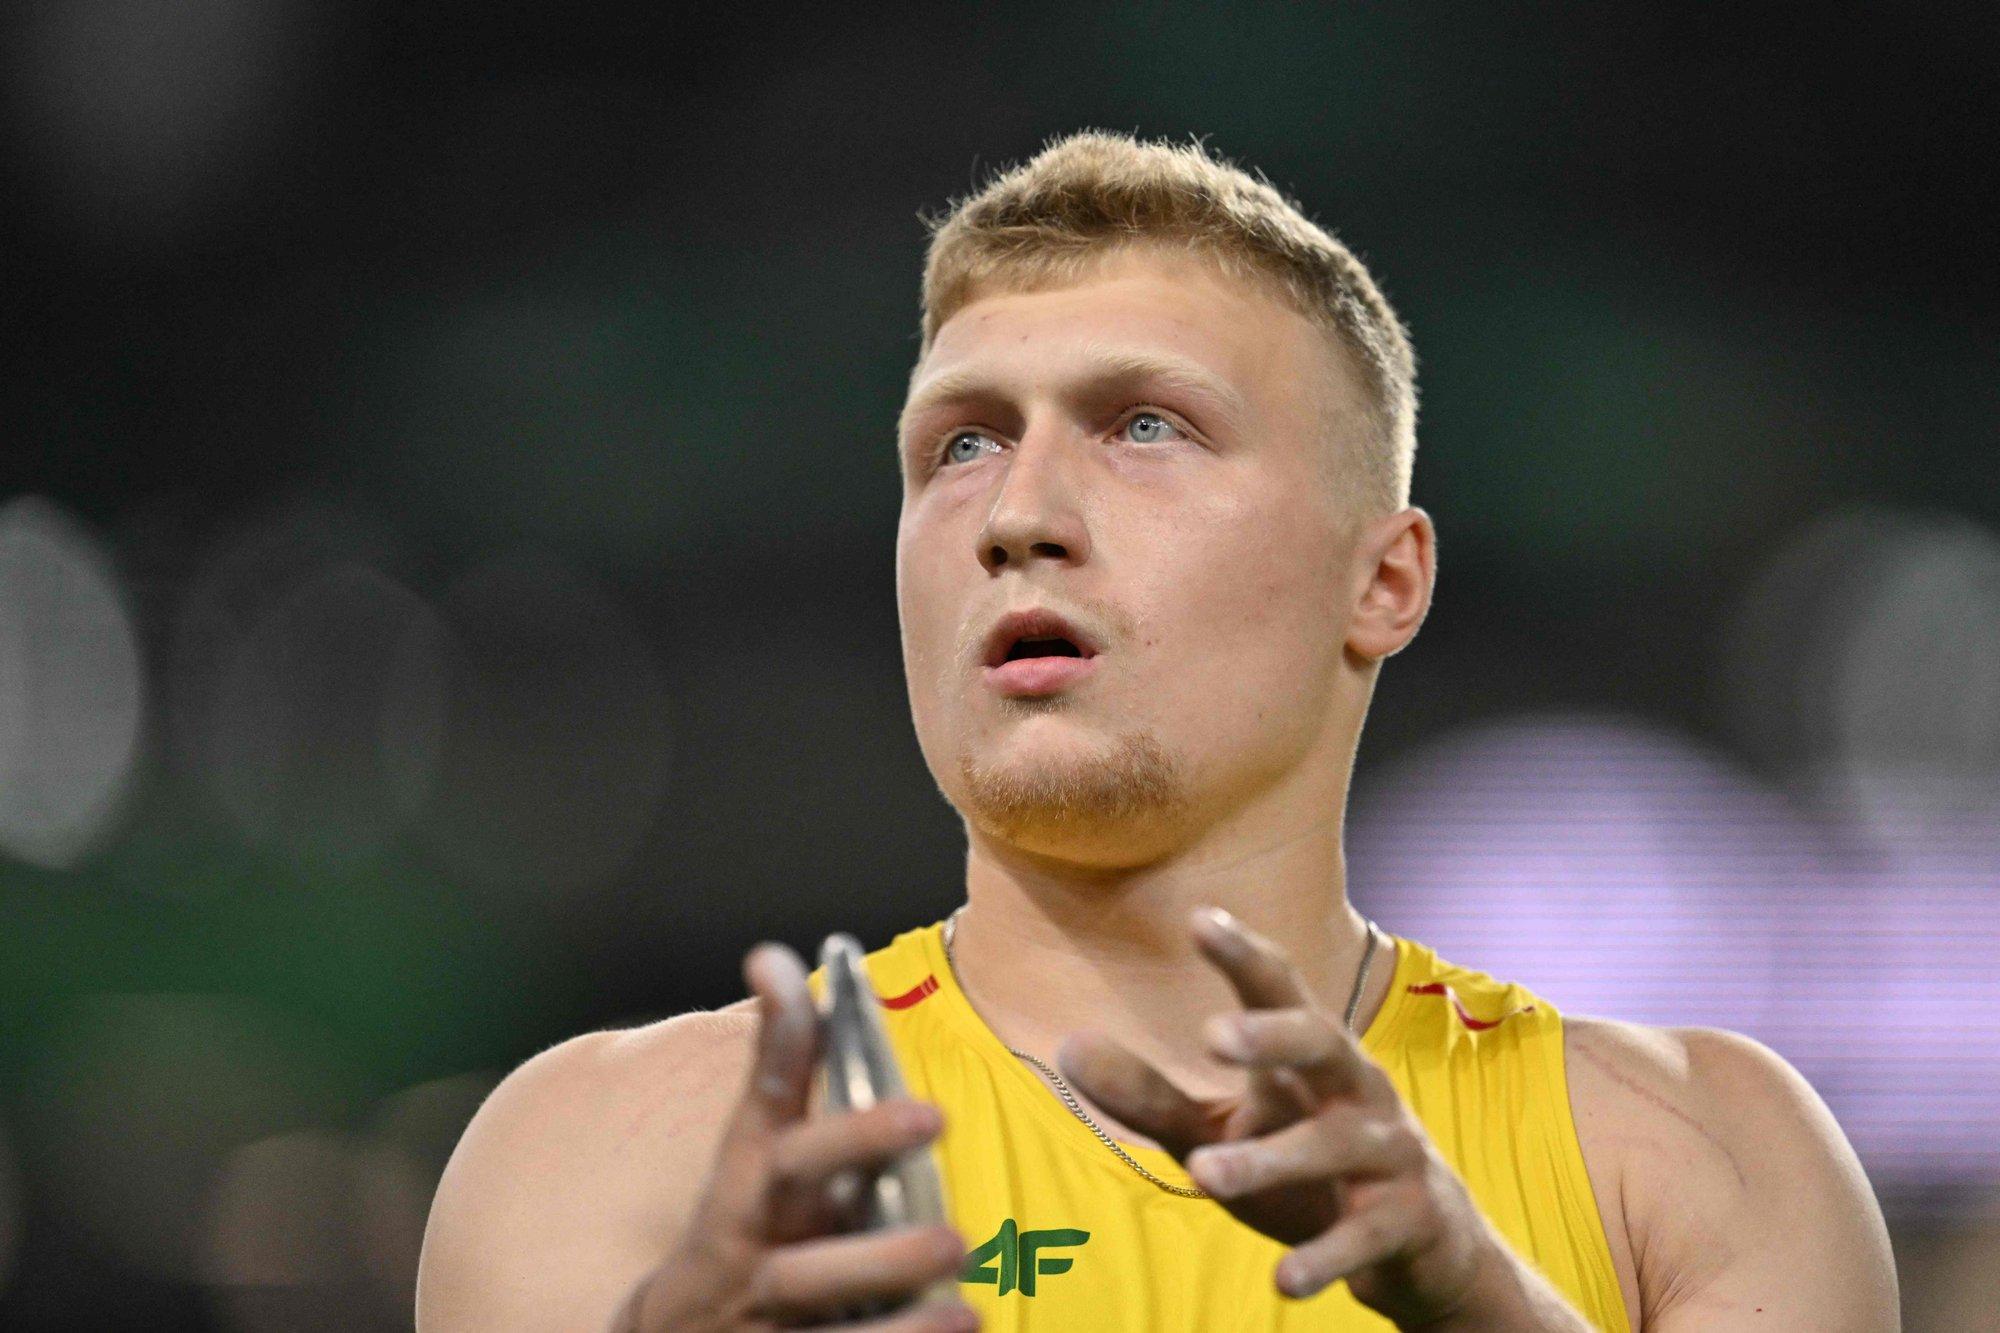 Alekna sets world record in discuss throw